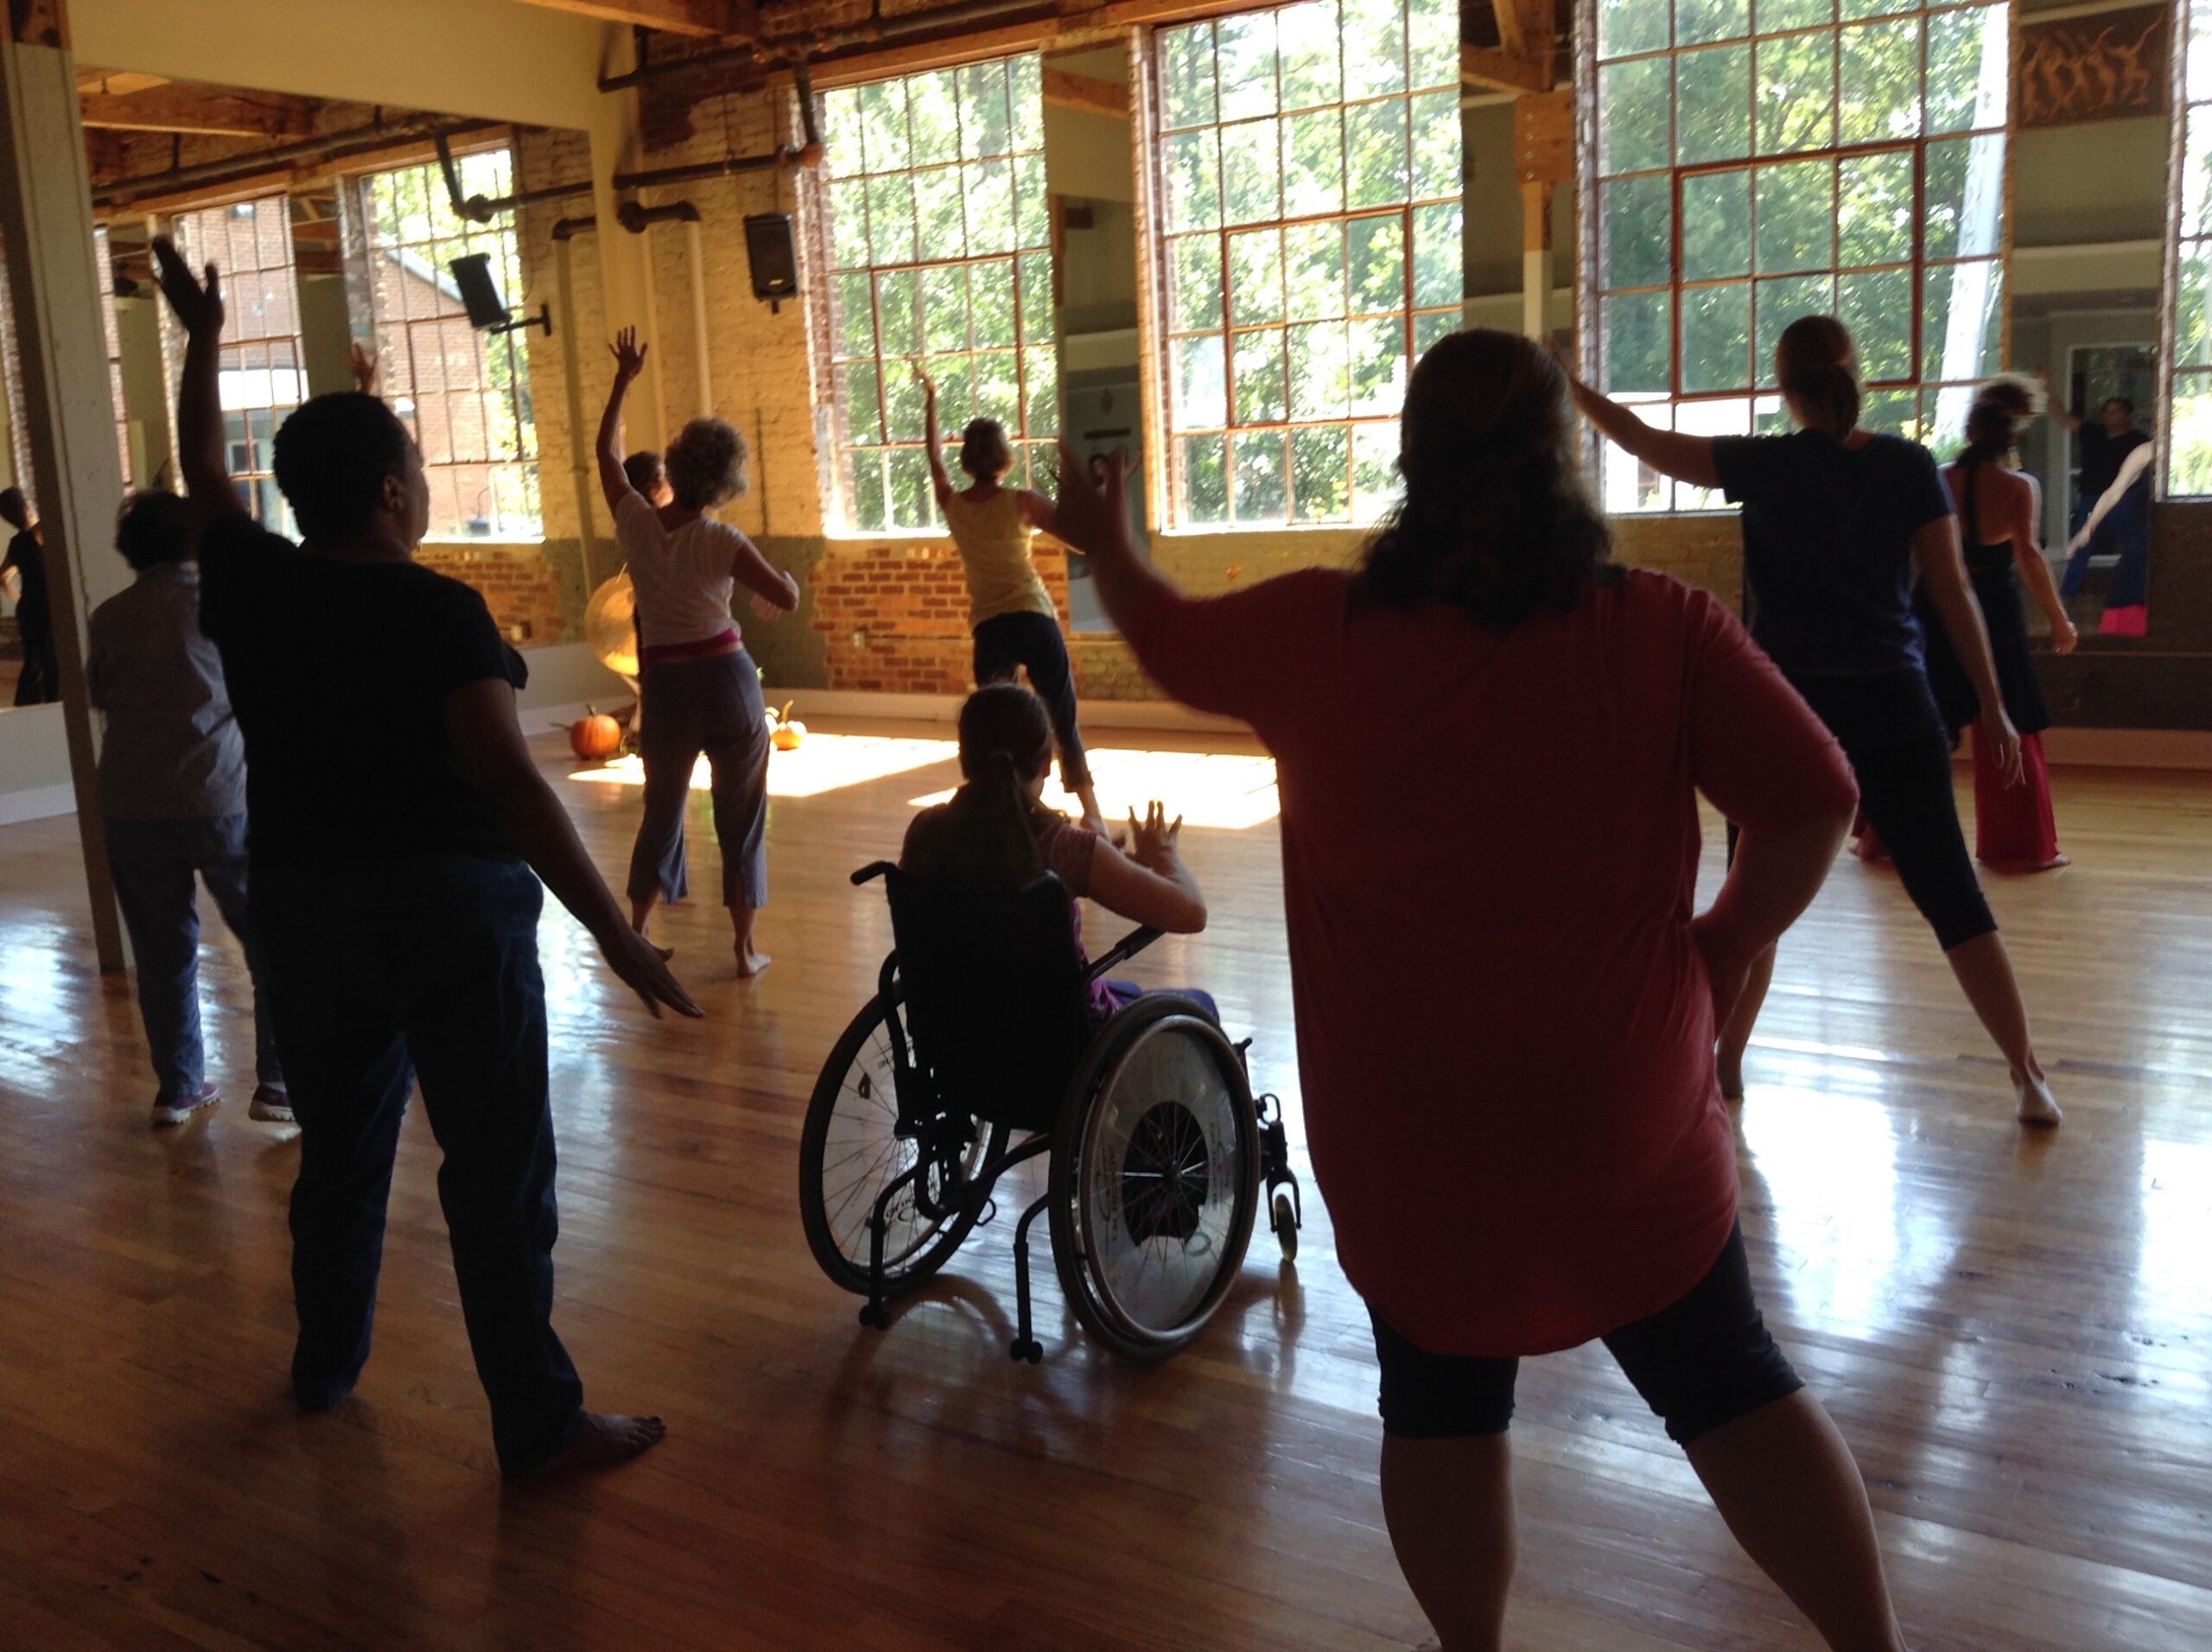 Nine people following choreography in a large converted mill dance studio. We see their backs. One participant in a wheelchair.